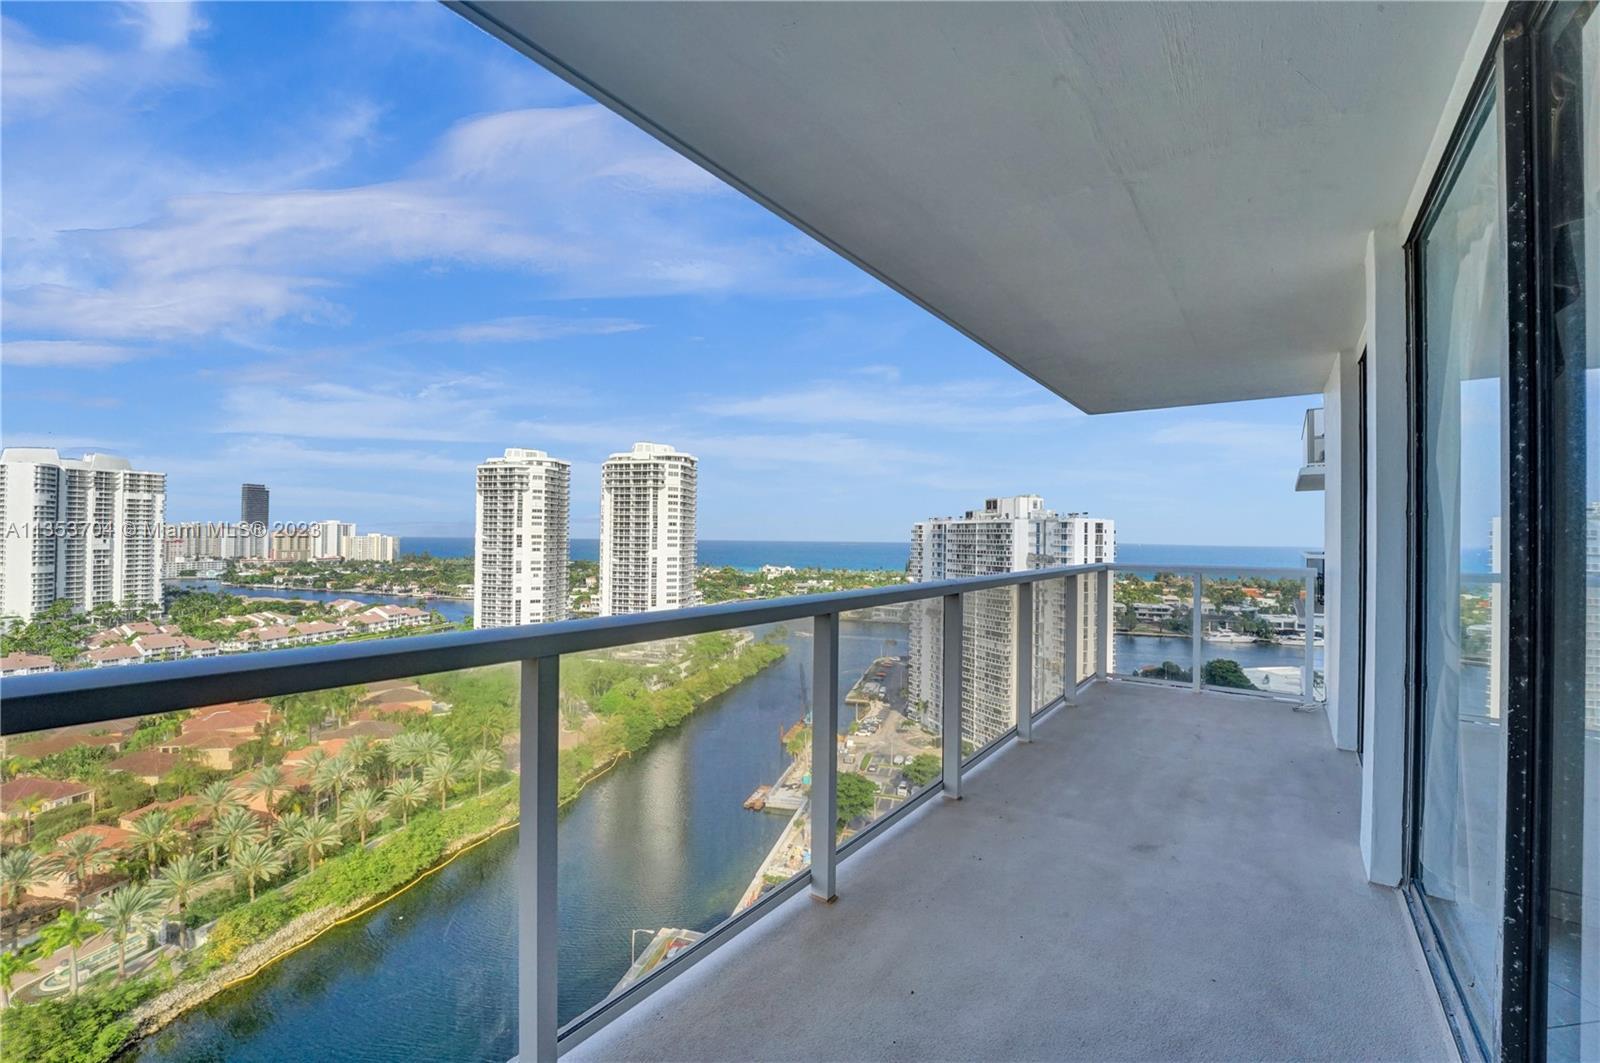 Design your dream home with this phenomenal corner unit and captivating water views! This spacious 2